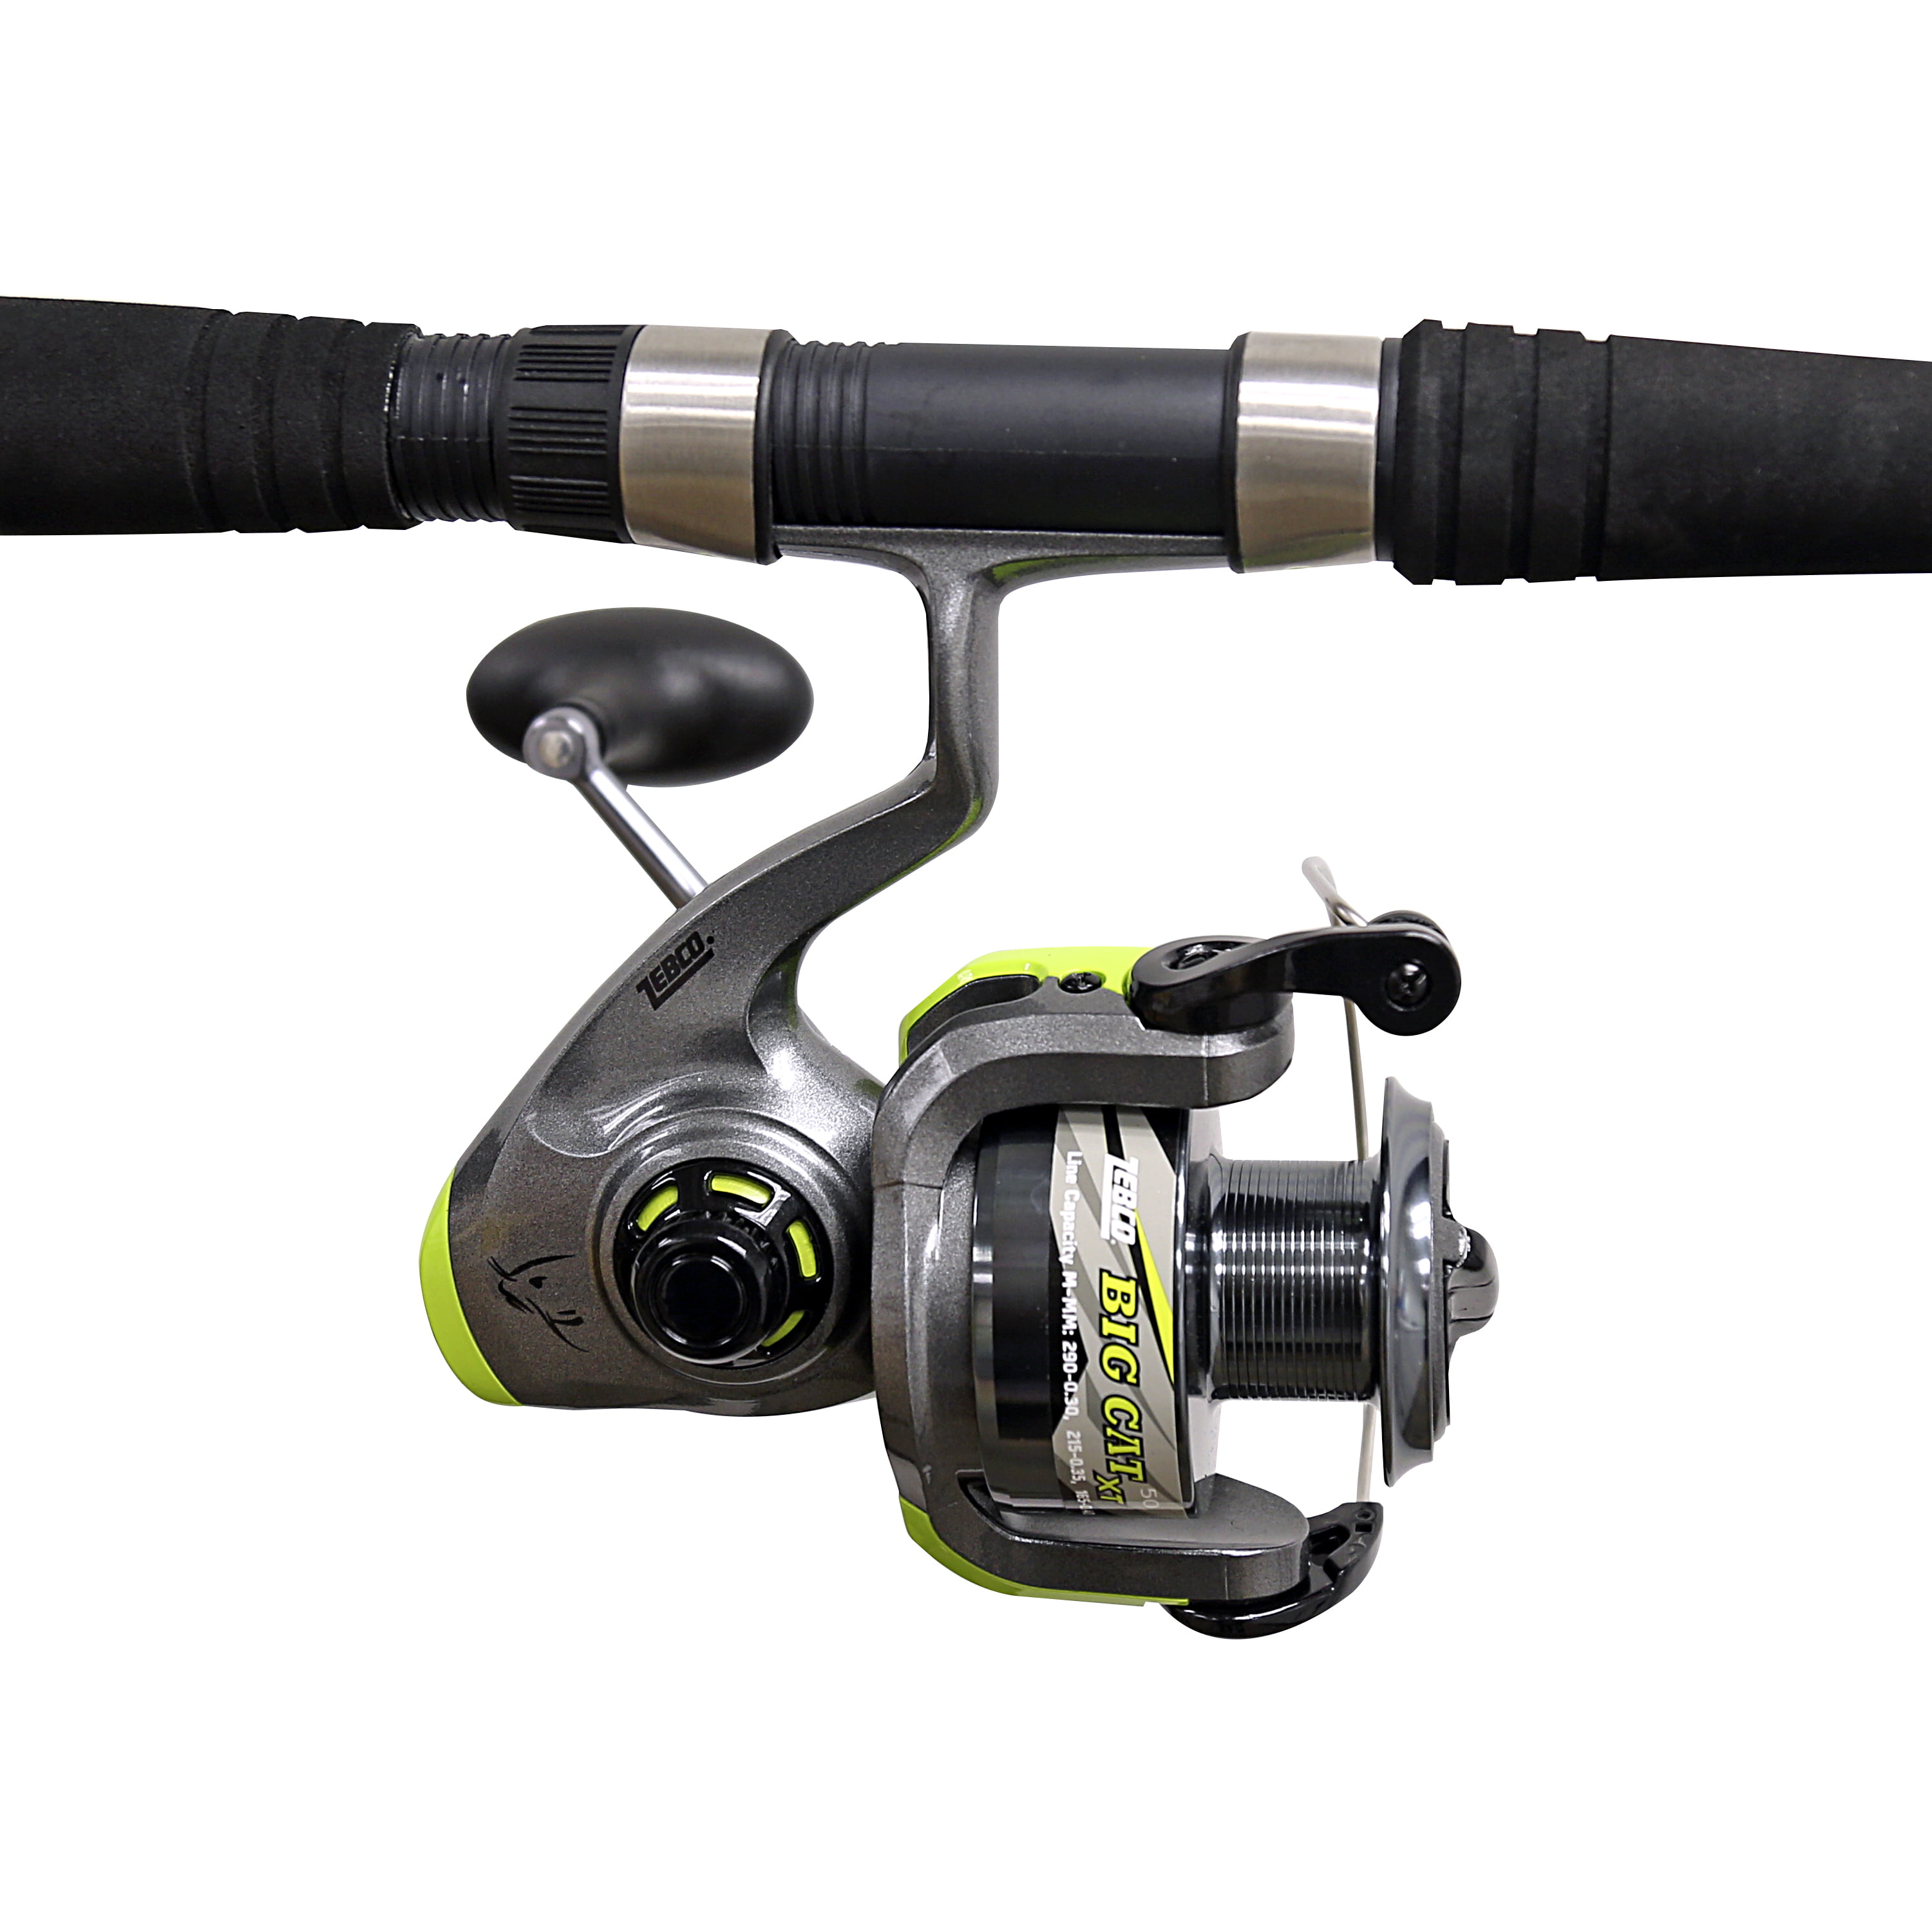 Zebco Big Cat XT Spinning Reel and 2-Piece Fishing Rod Combo